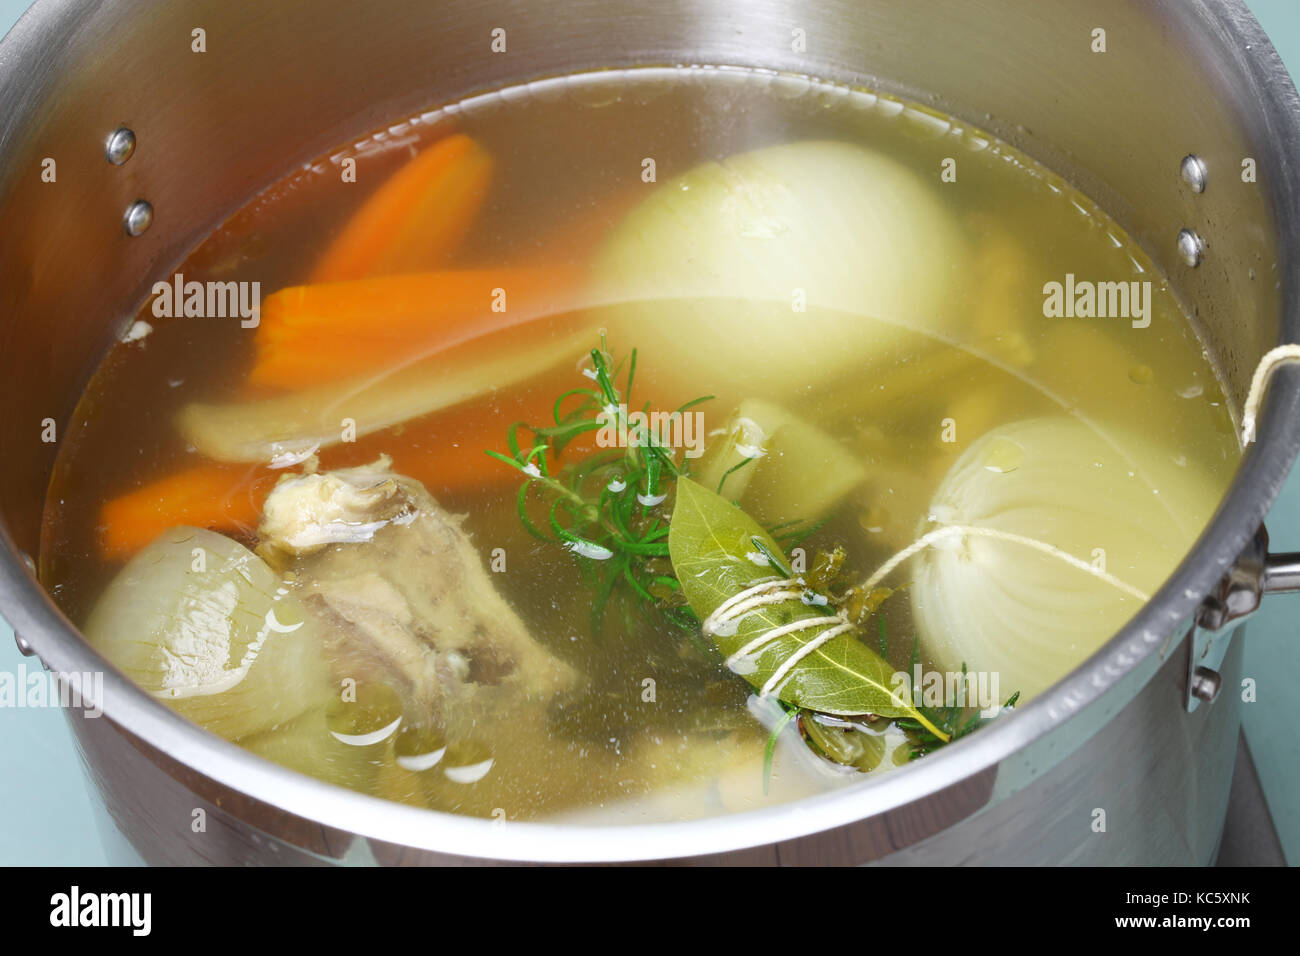 making chicken soup stock (bouillon) in a pot Stock Photo